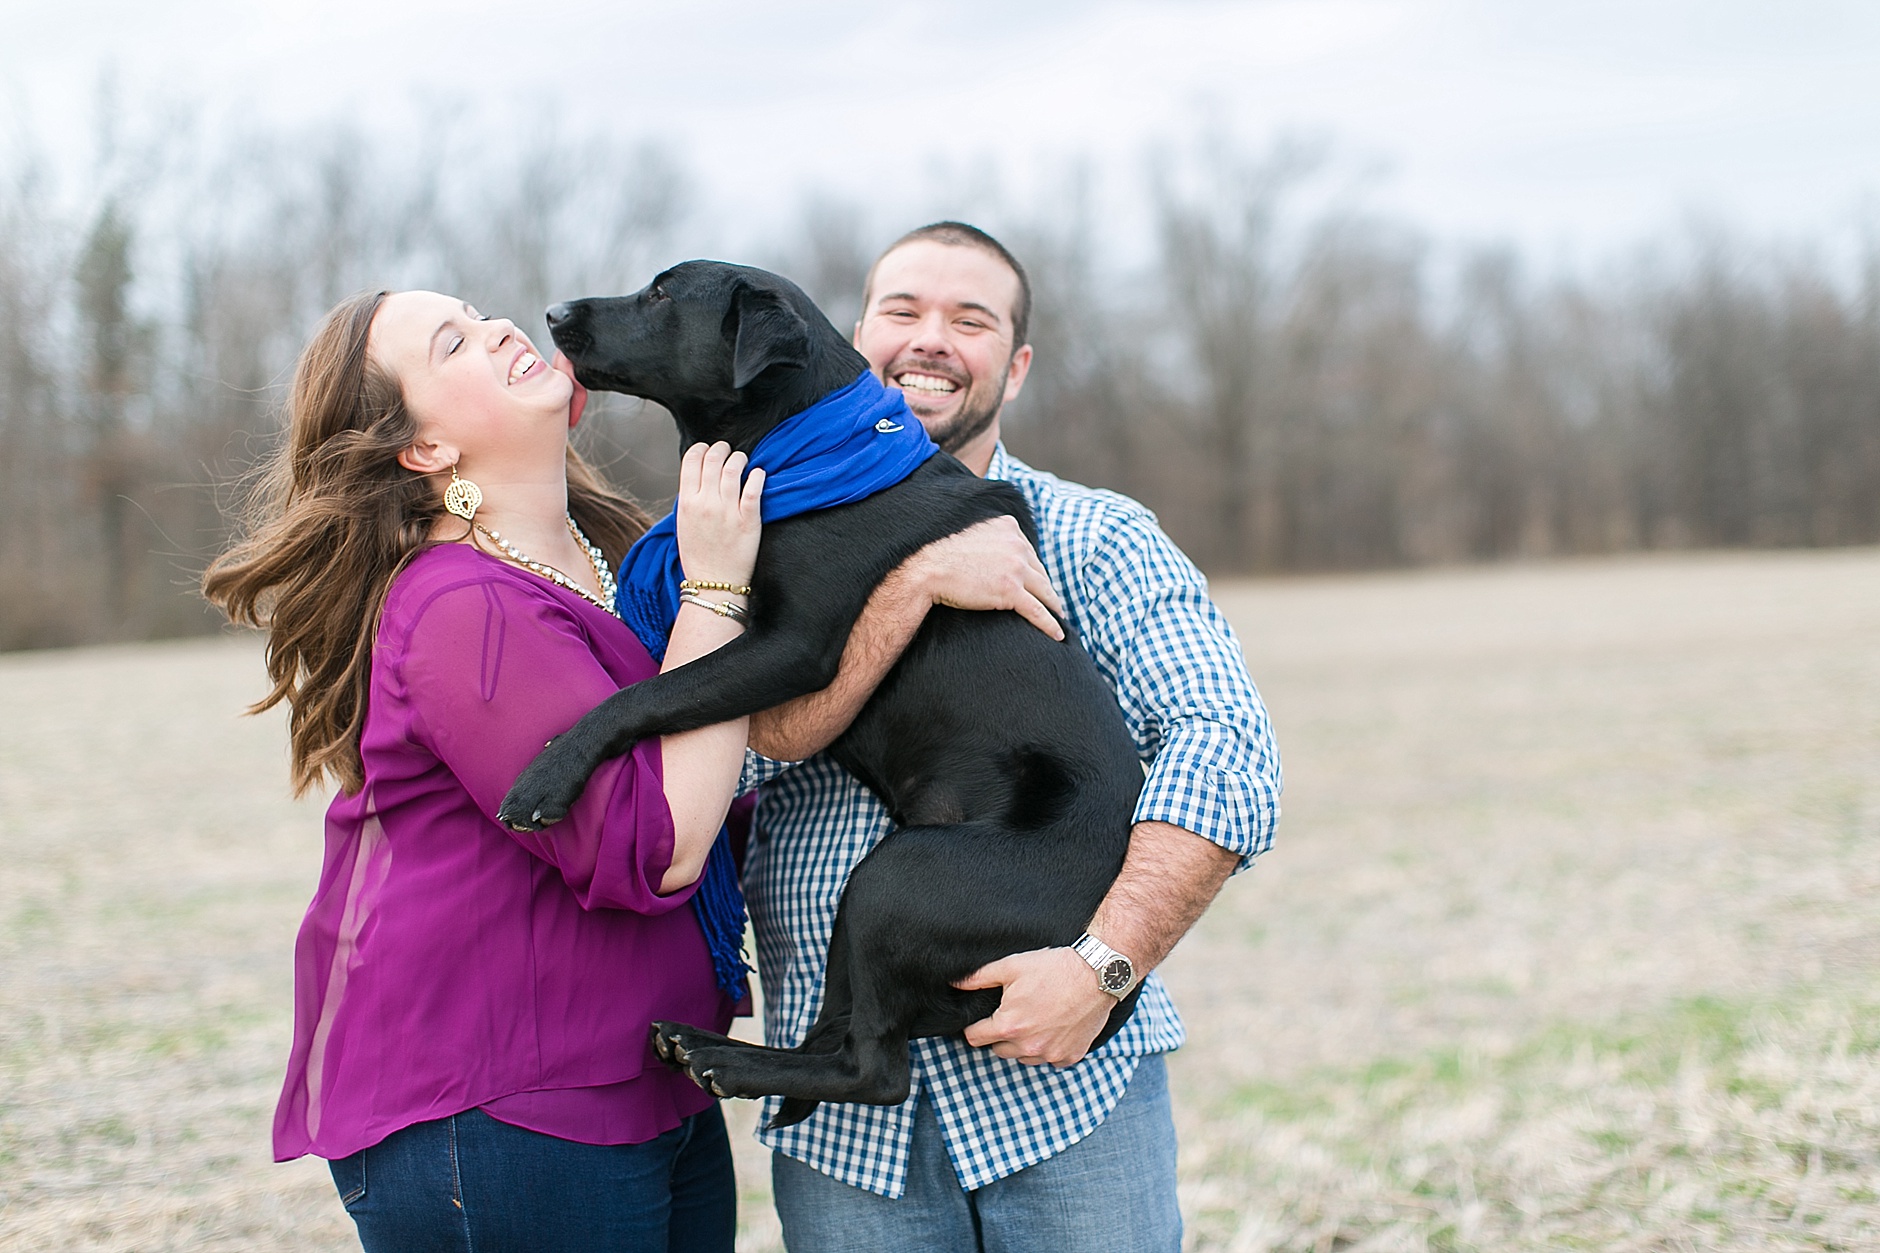 A Paducah Kentucky Engagament Session by Rachael Houser Photography